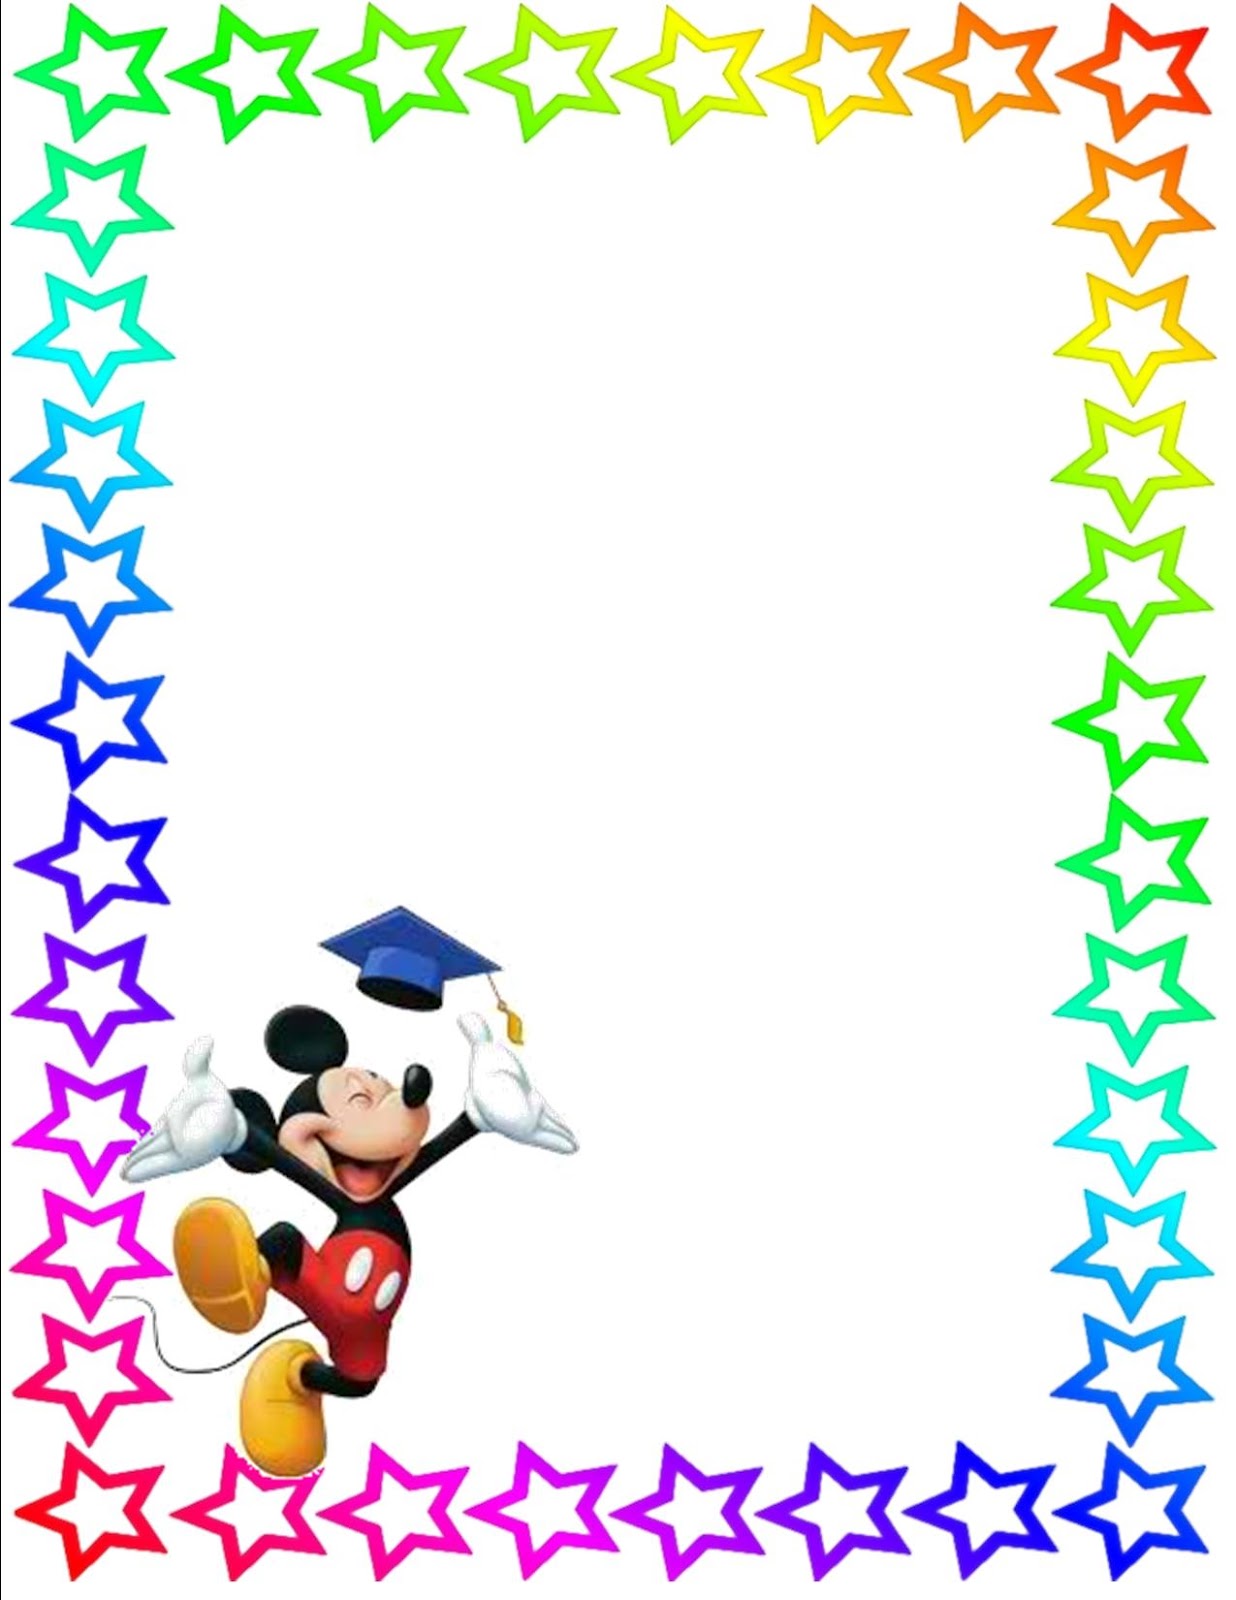 Free Mickey Mouse Border Download Free Mickey Mouse Border Png Images Free Cliparts On Clipart Library